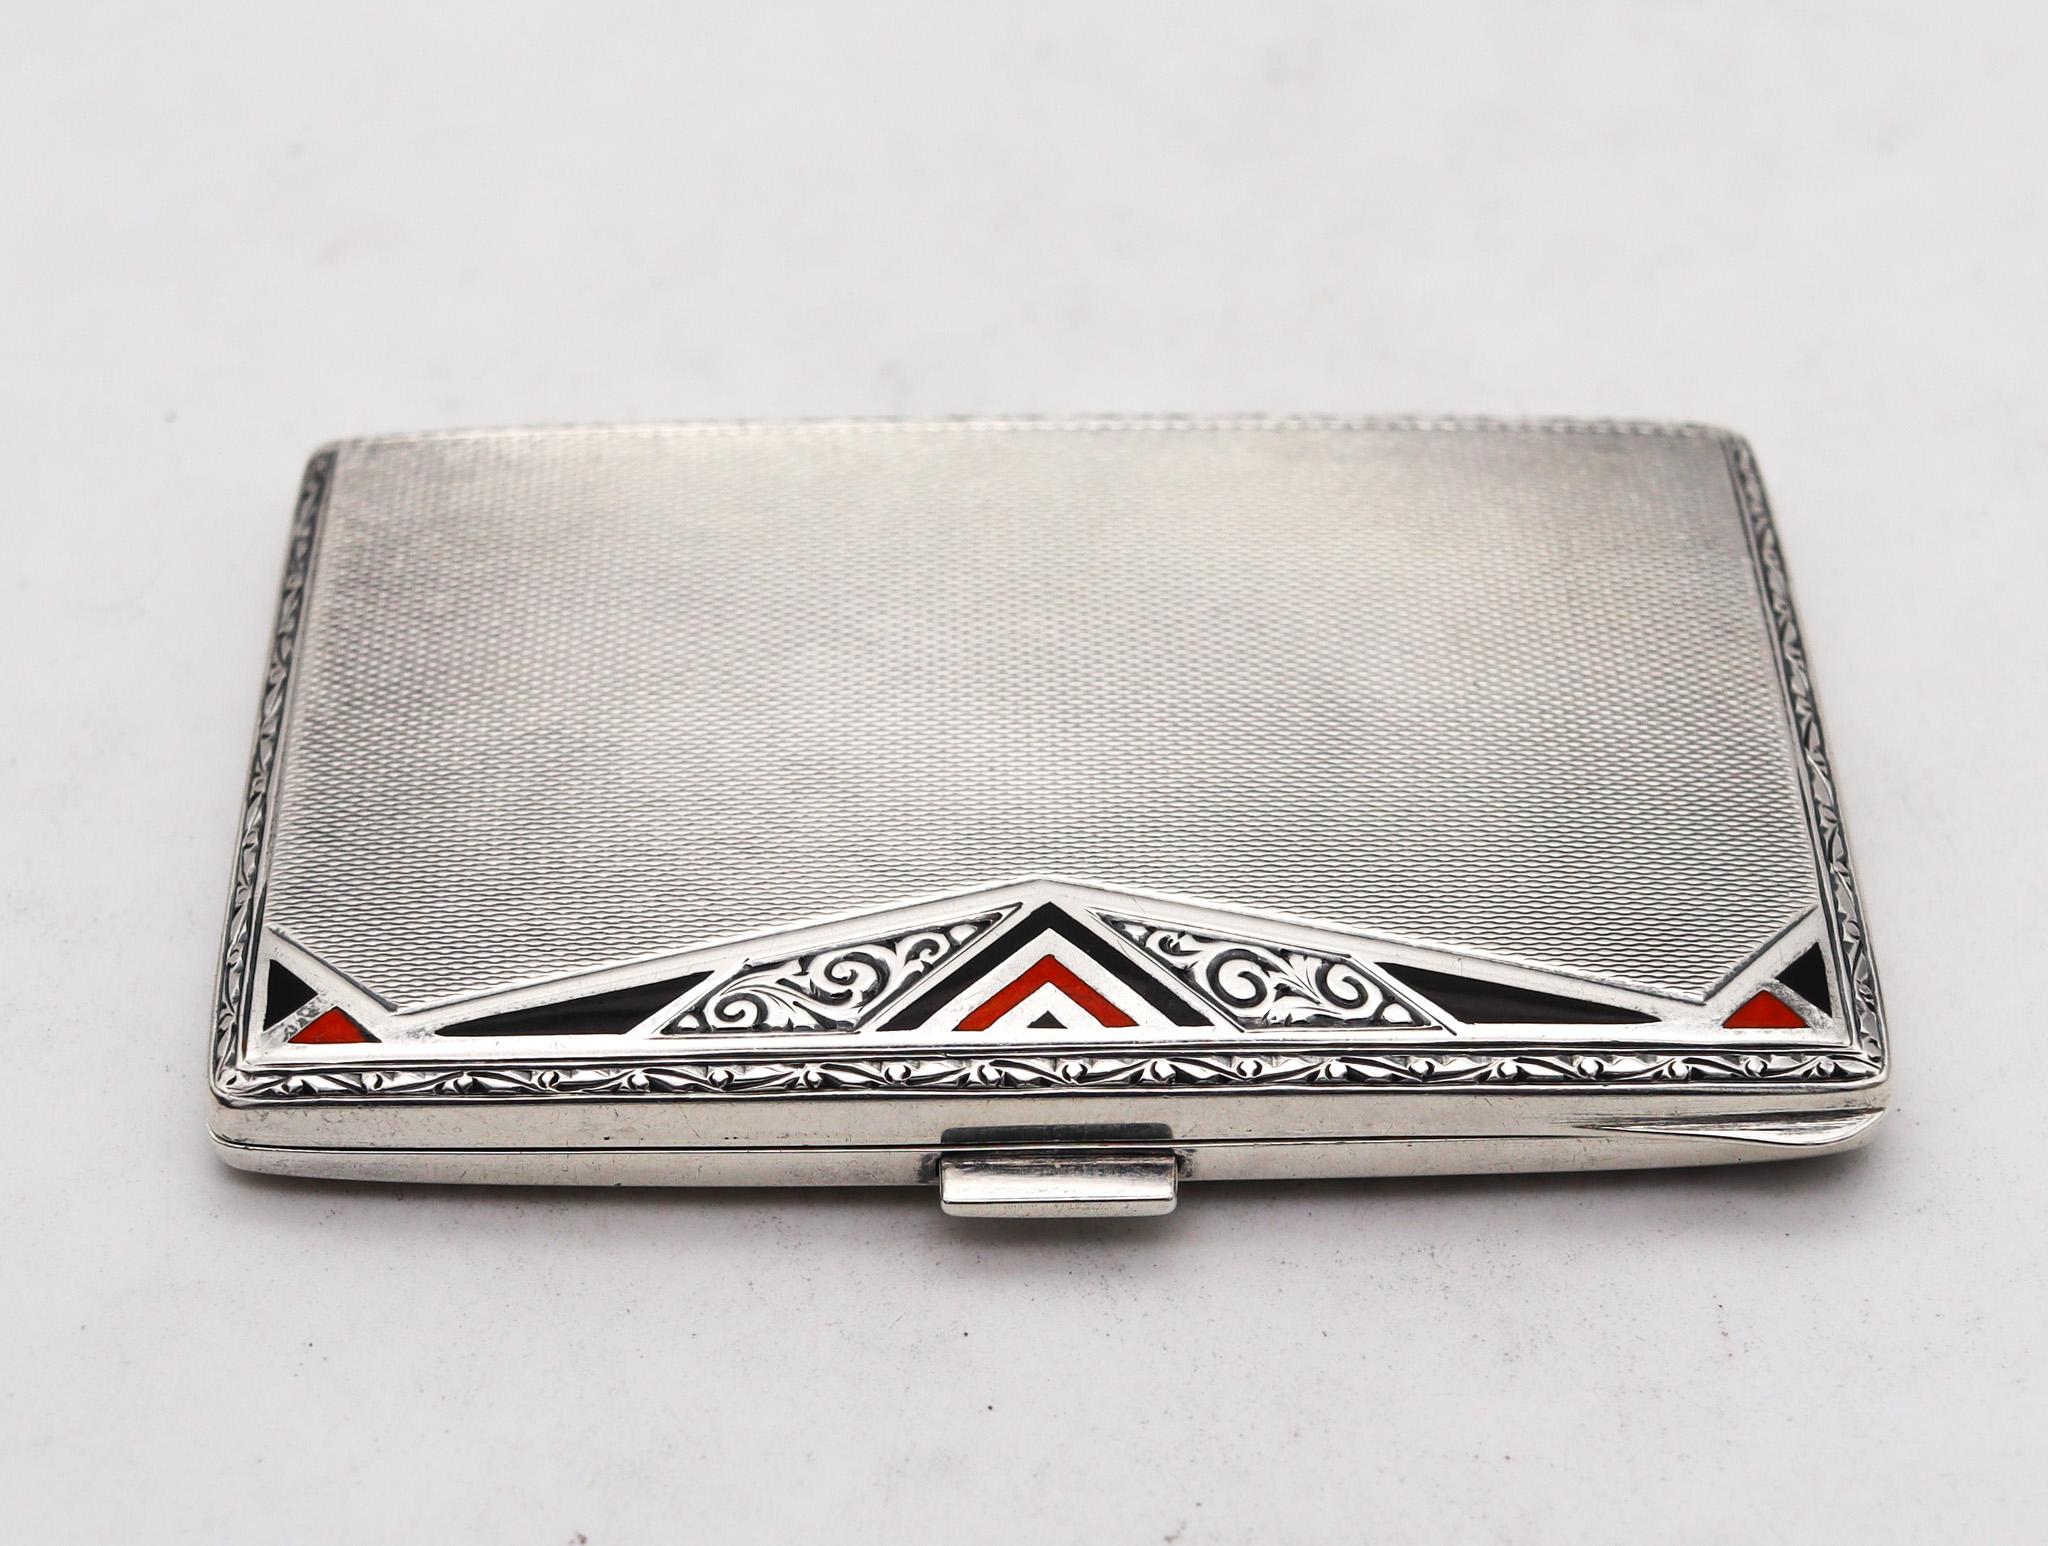 Art deco enamel case box designed by A. Wilcox for Maison Birks.

Beautiful case box, created in England at the silversmith workshop of A. Wilcox back in the 1925. This stunning and rare box has been crafted for the Canadian jewelry house of Maison